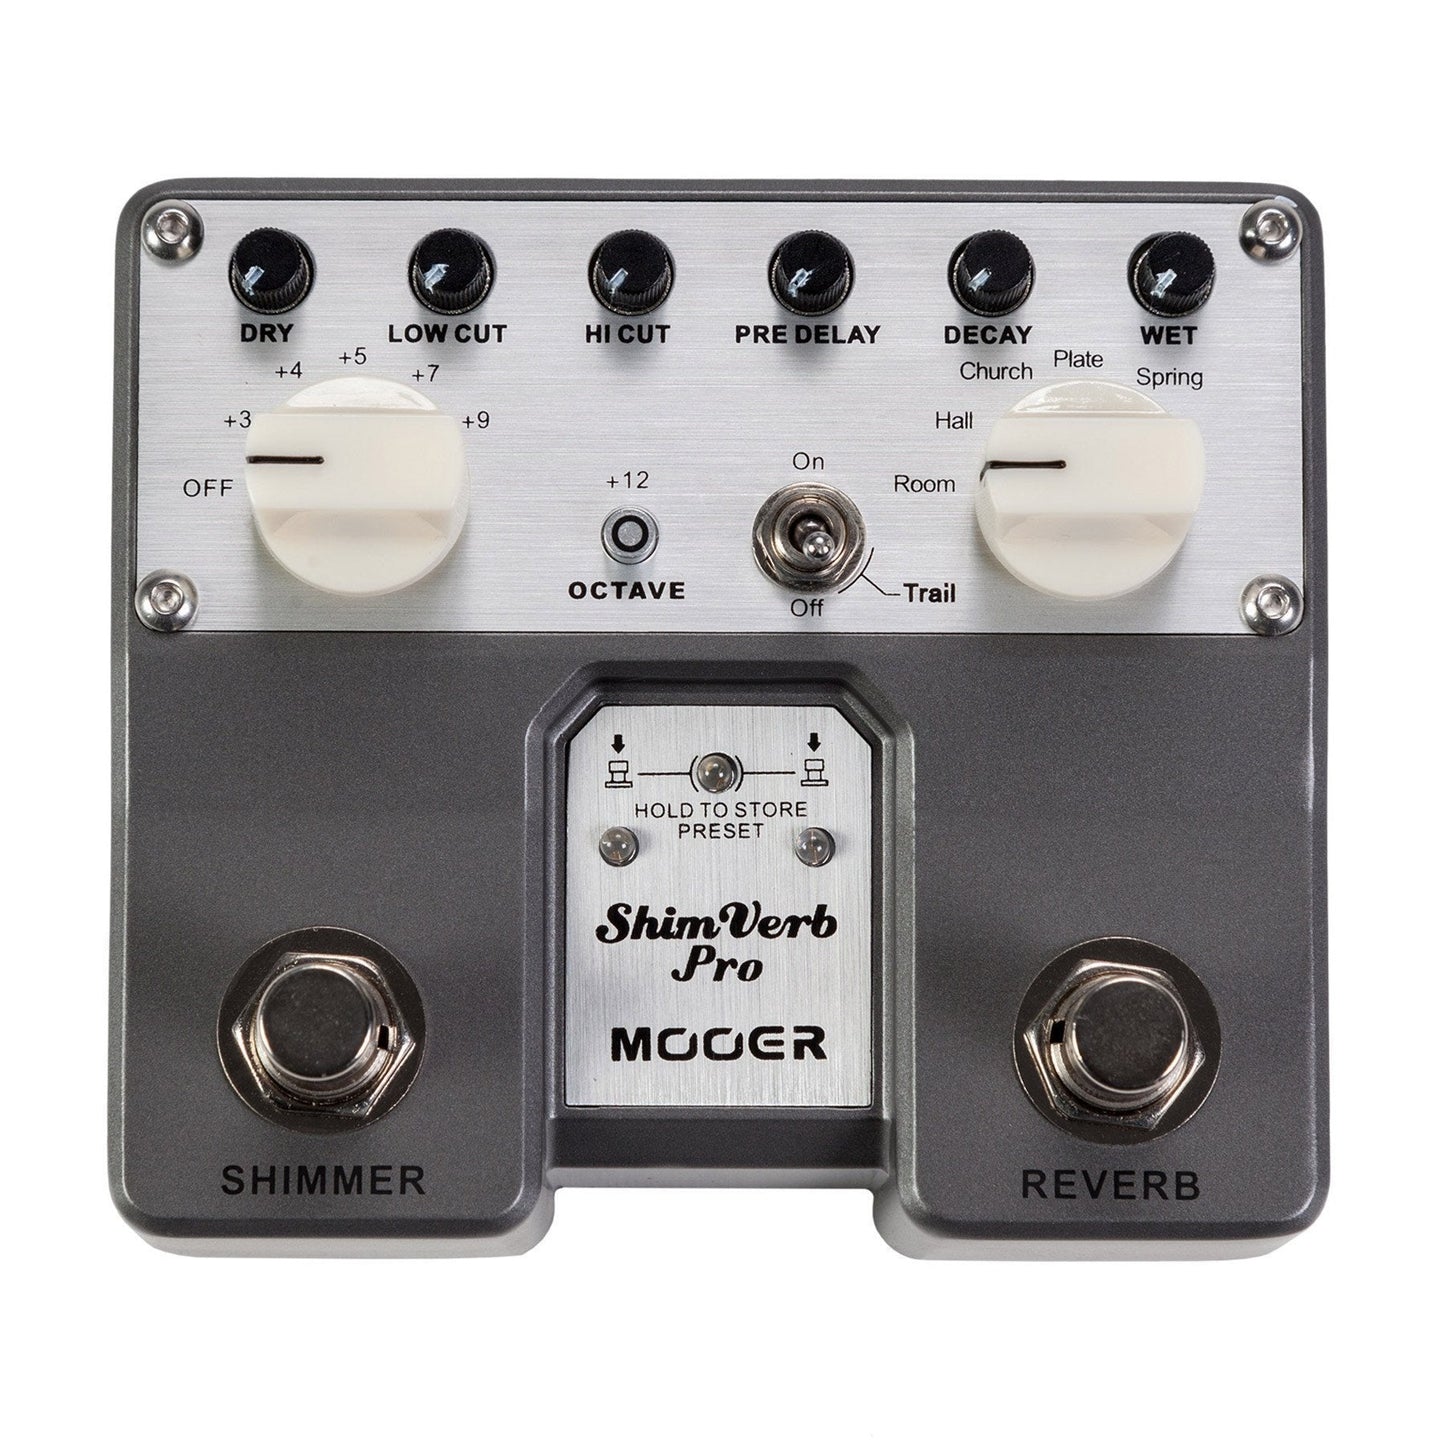 Mooer Shimverb Pro Reverb Dual Guitar Effects Pedal